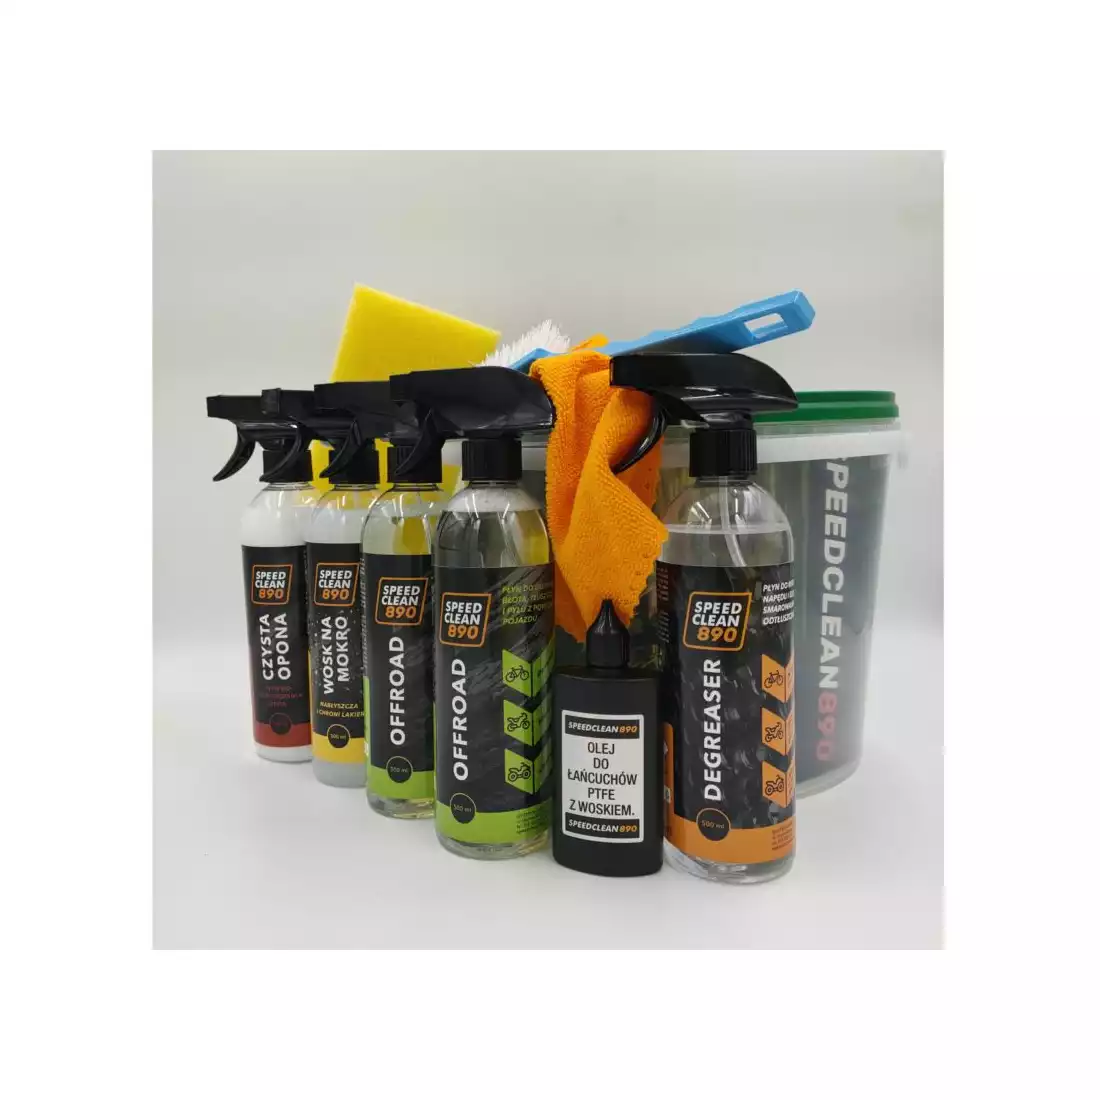 SPEEDCLEAN890 Bicycle washing and care kit